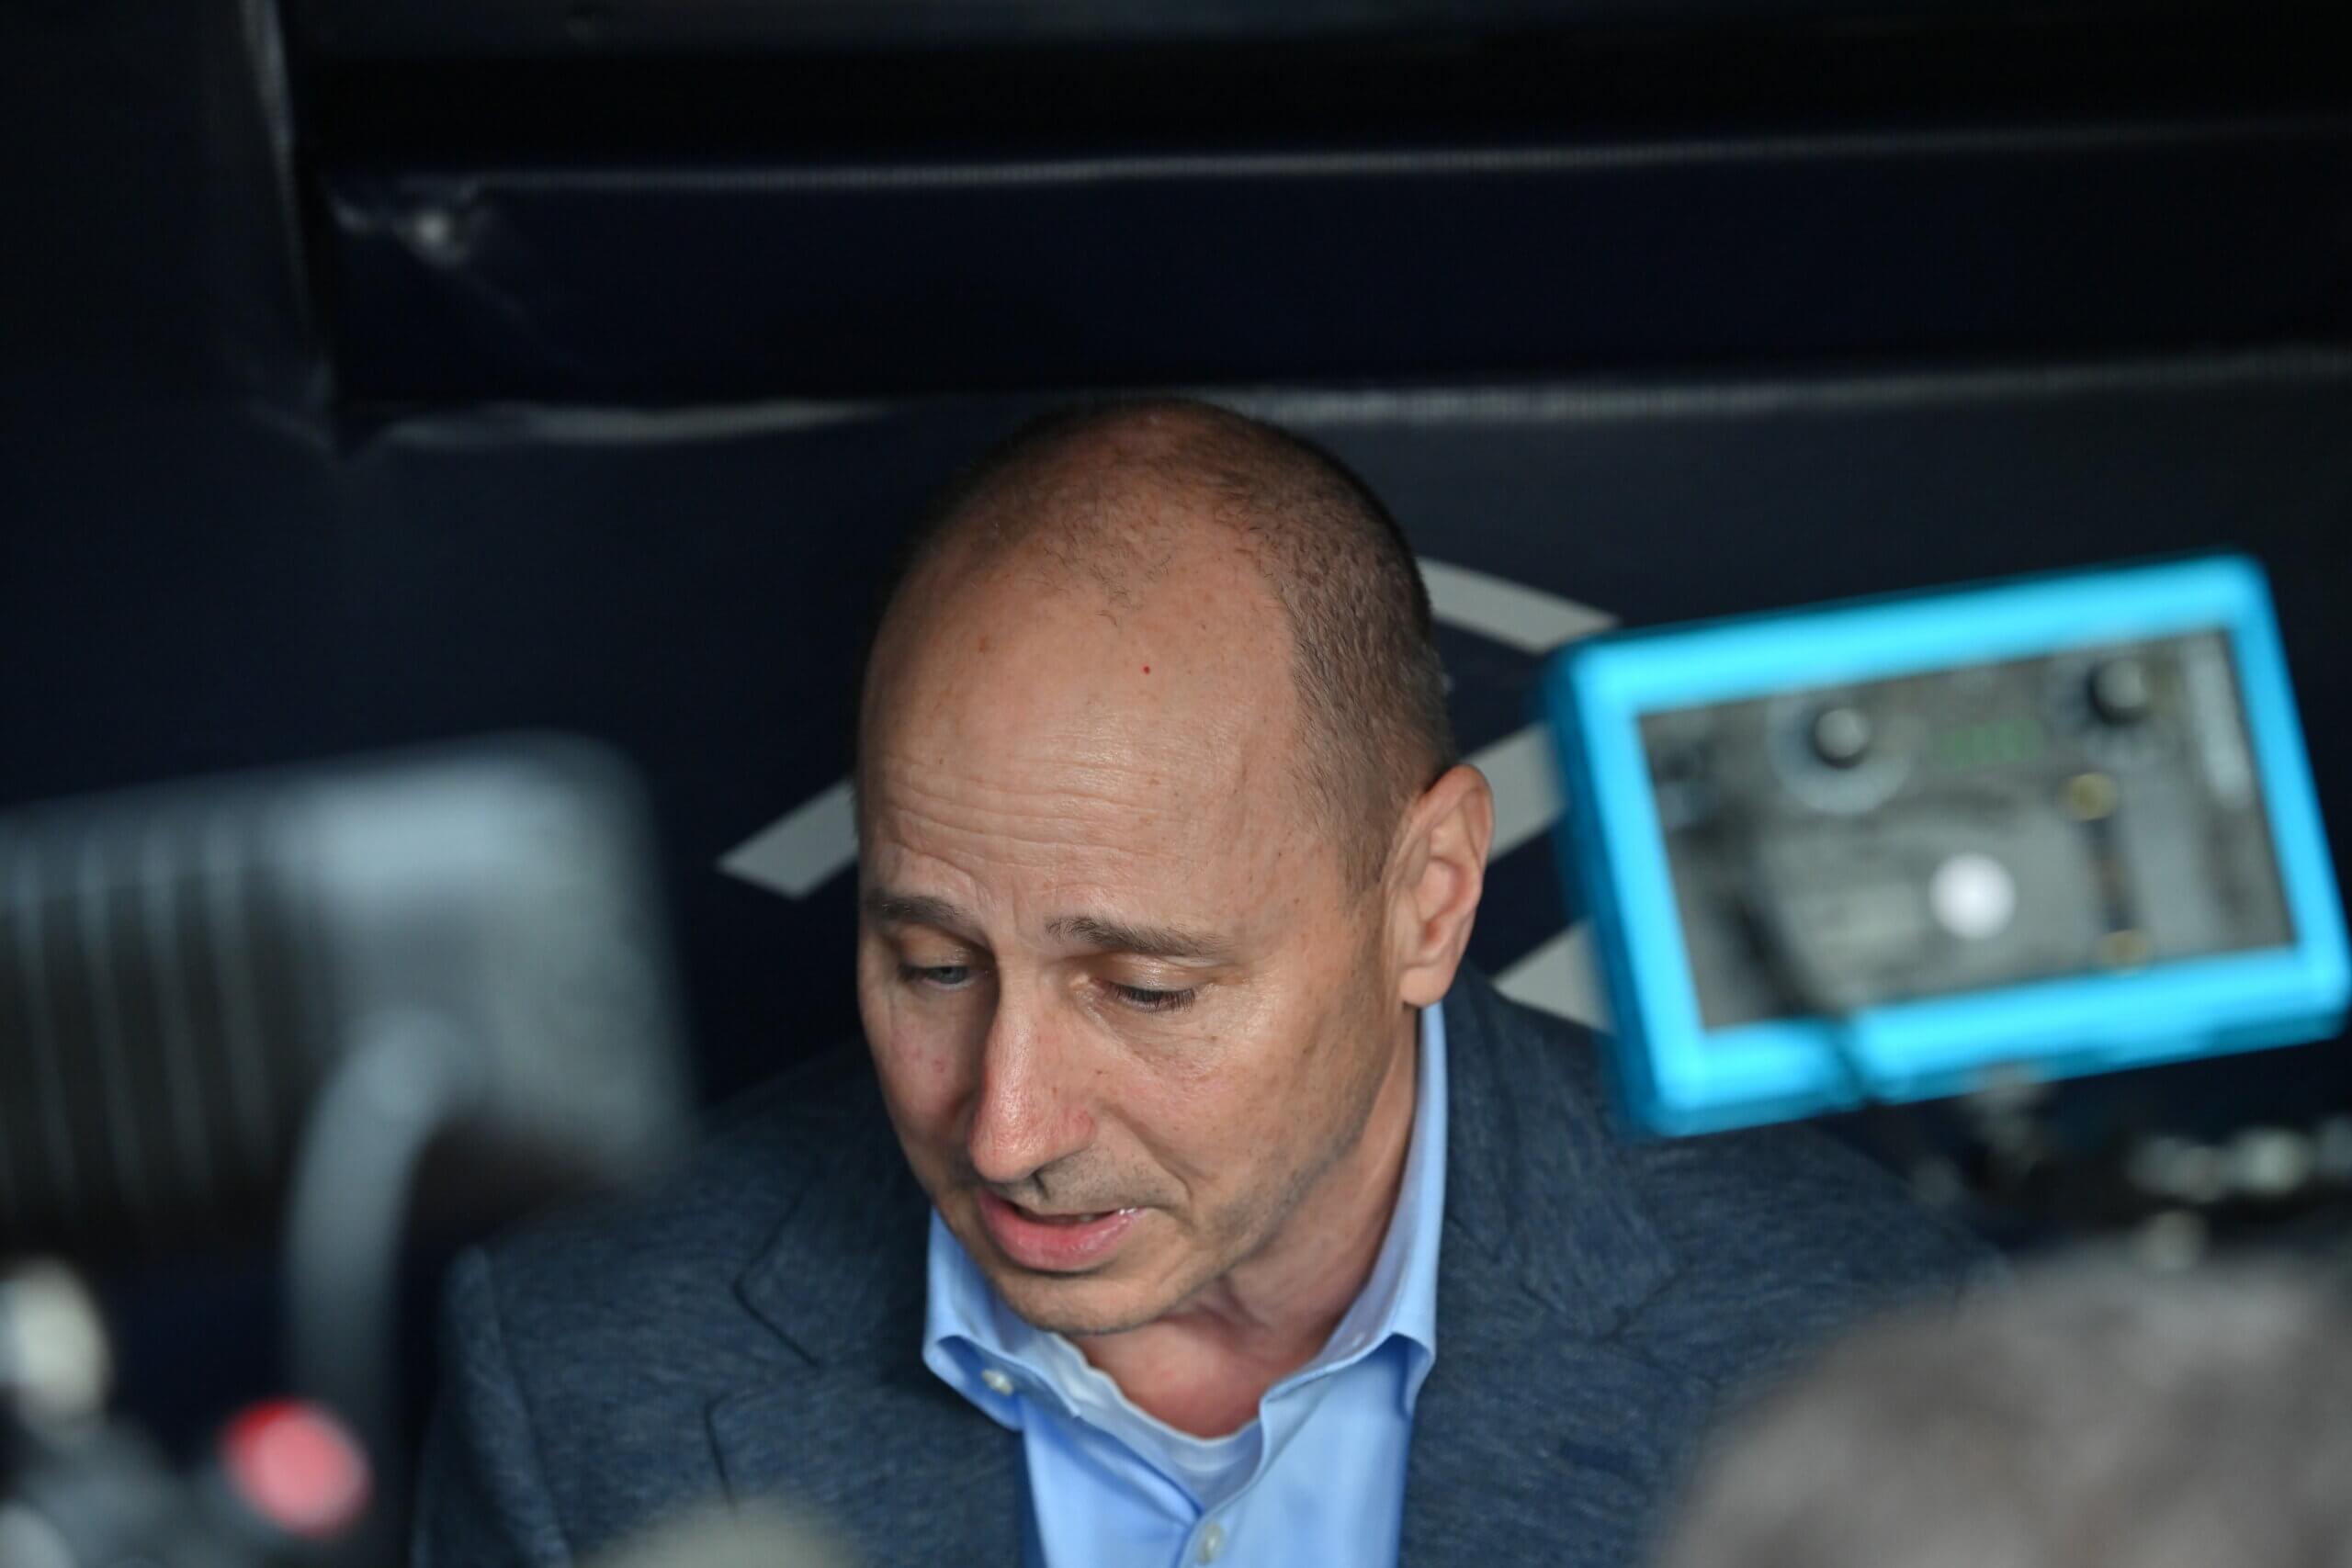 Yankees general manager Brian Cashman speaking to reporters inside the dugout at Yankee Stadium on May 3, 2023.